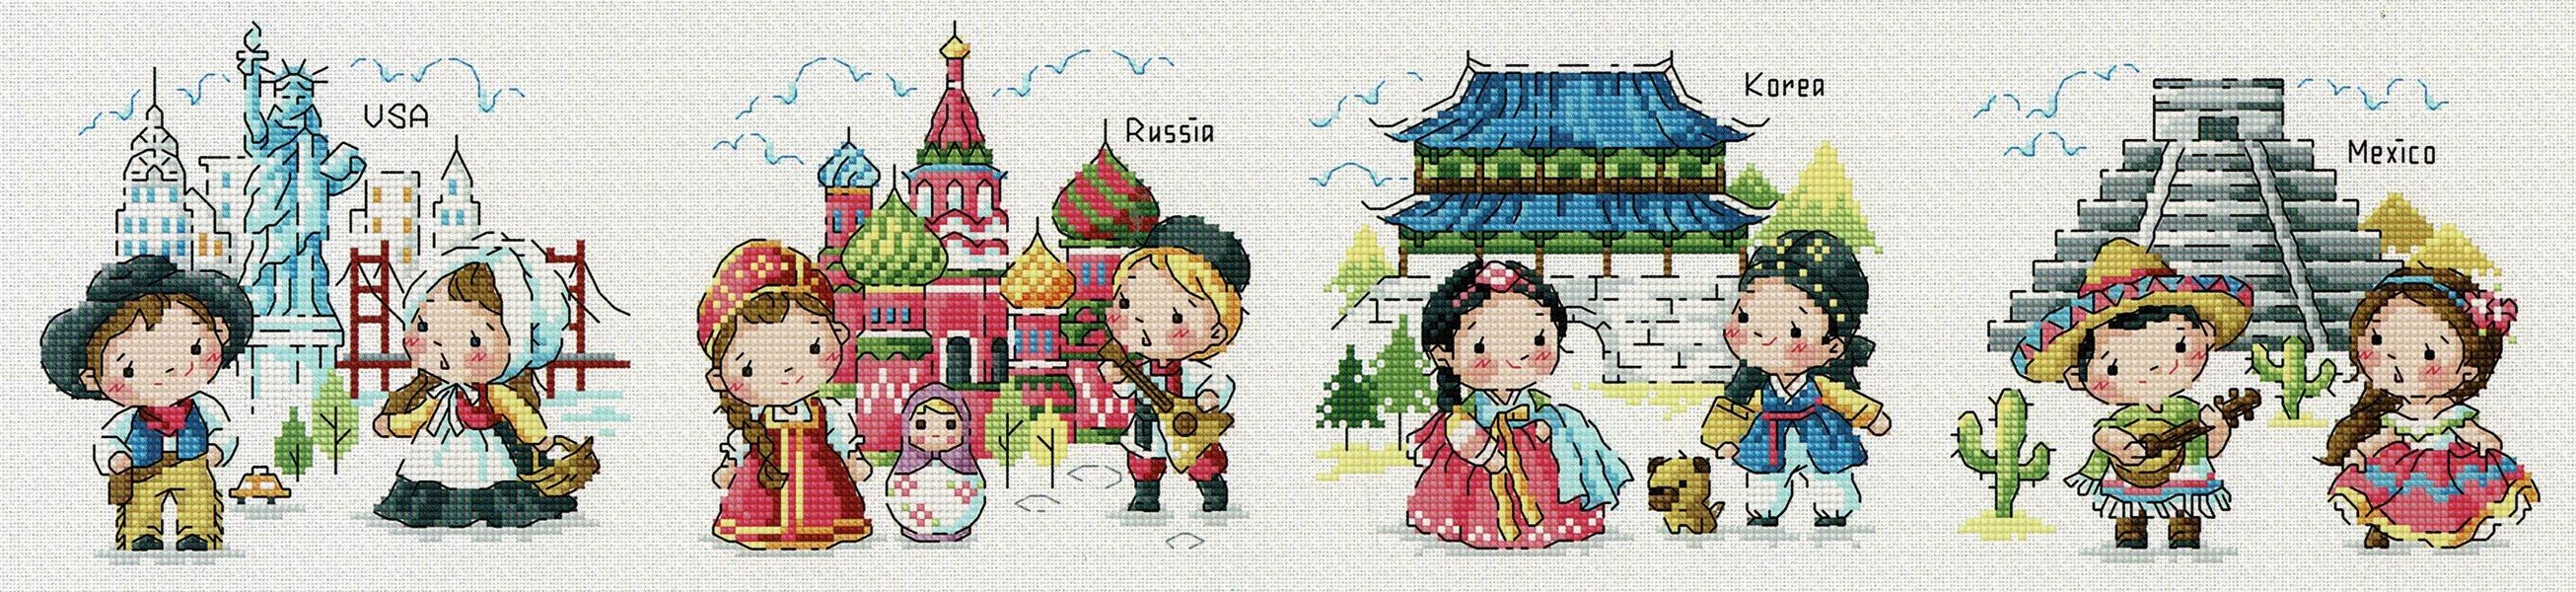 SODA Cross Stitch Pattern leaflet authentic Korean cross stitch design chart color printed on coated paper SO-3160 Love Kong Kong!